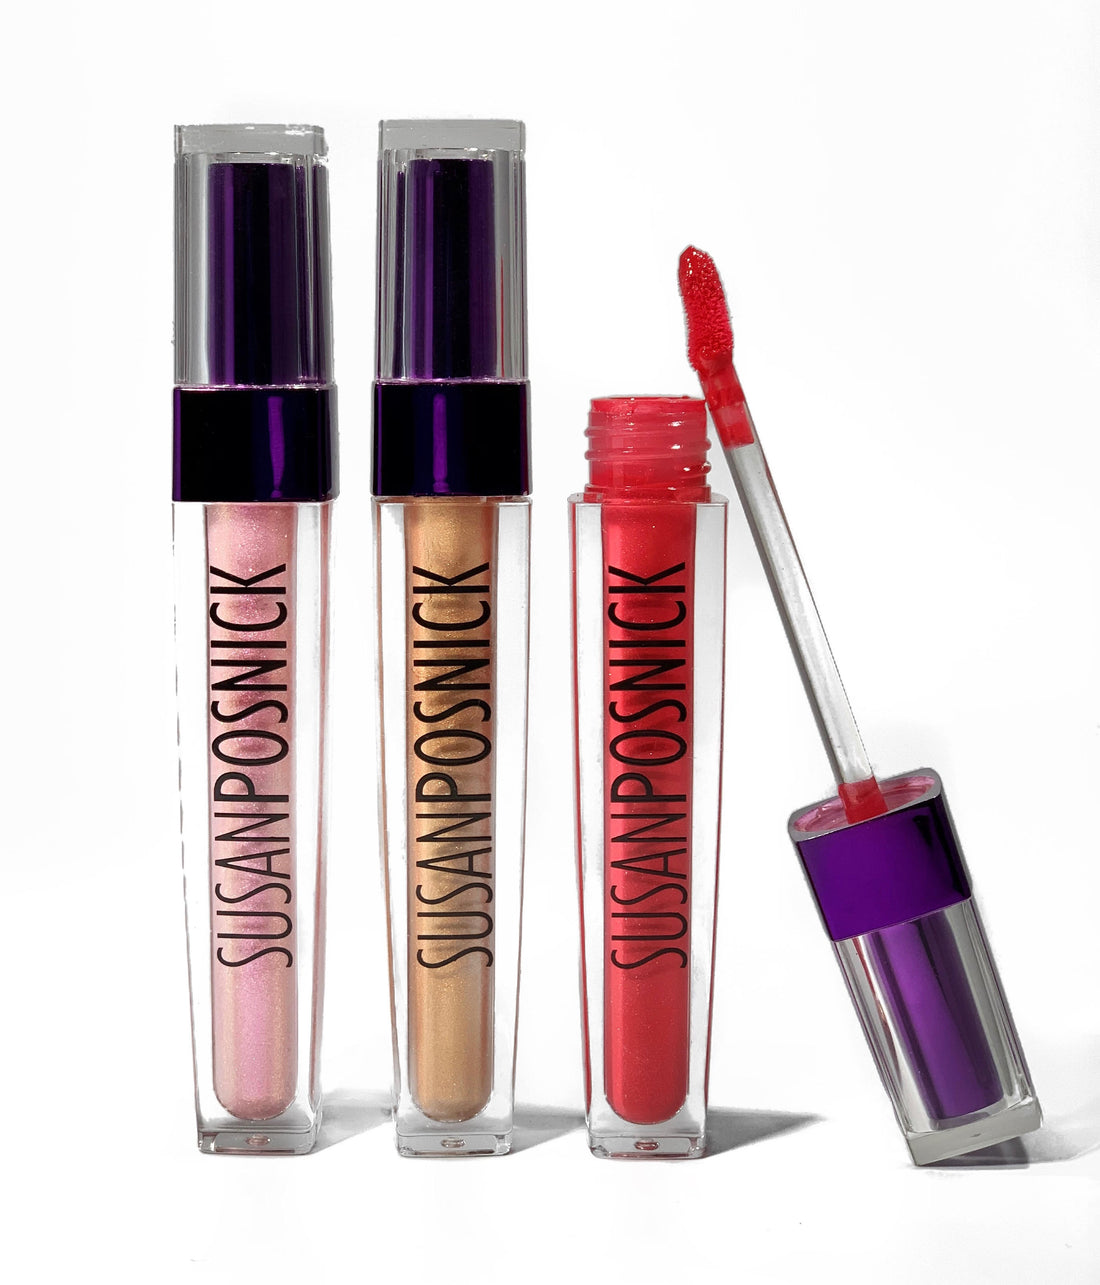 Susan Posnick DD Lip Gloss in 3 different colors.